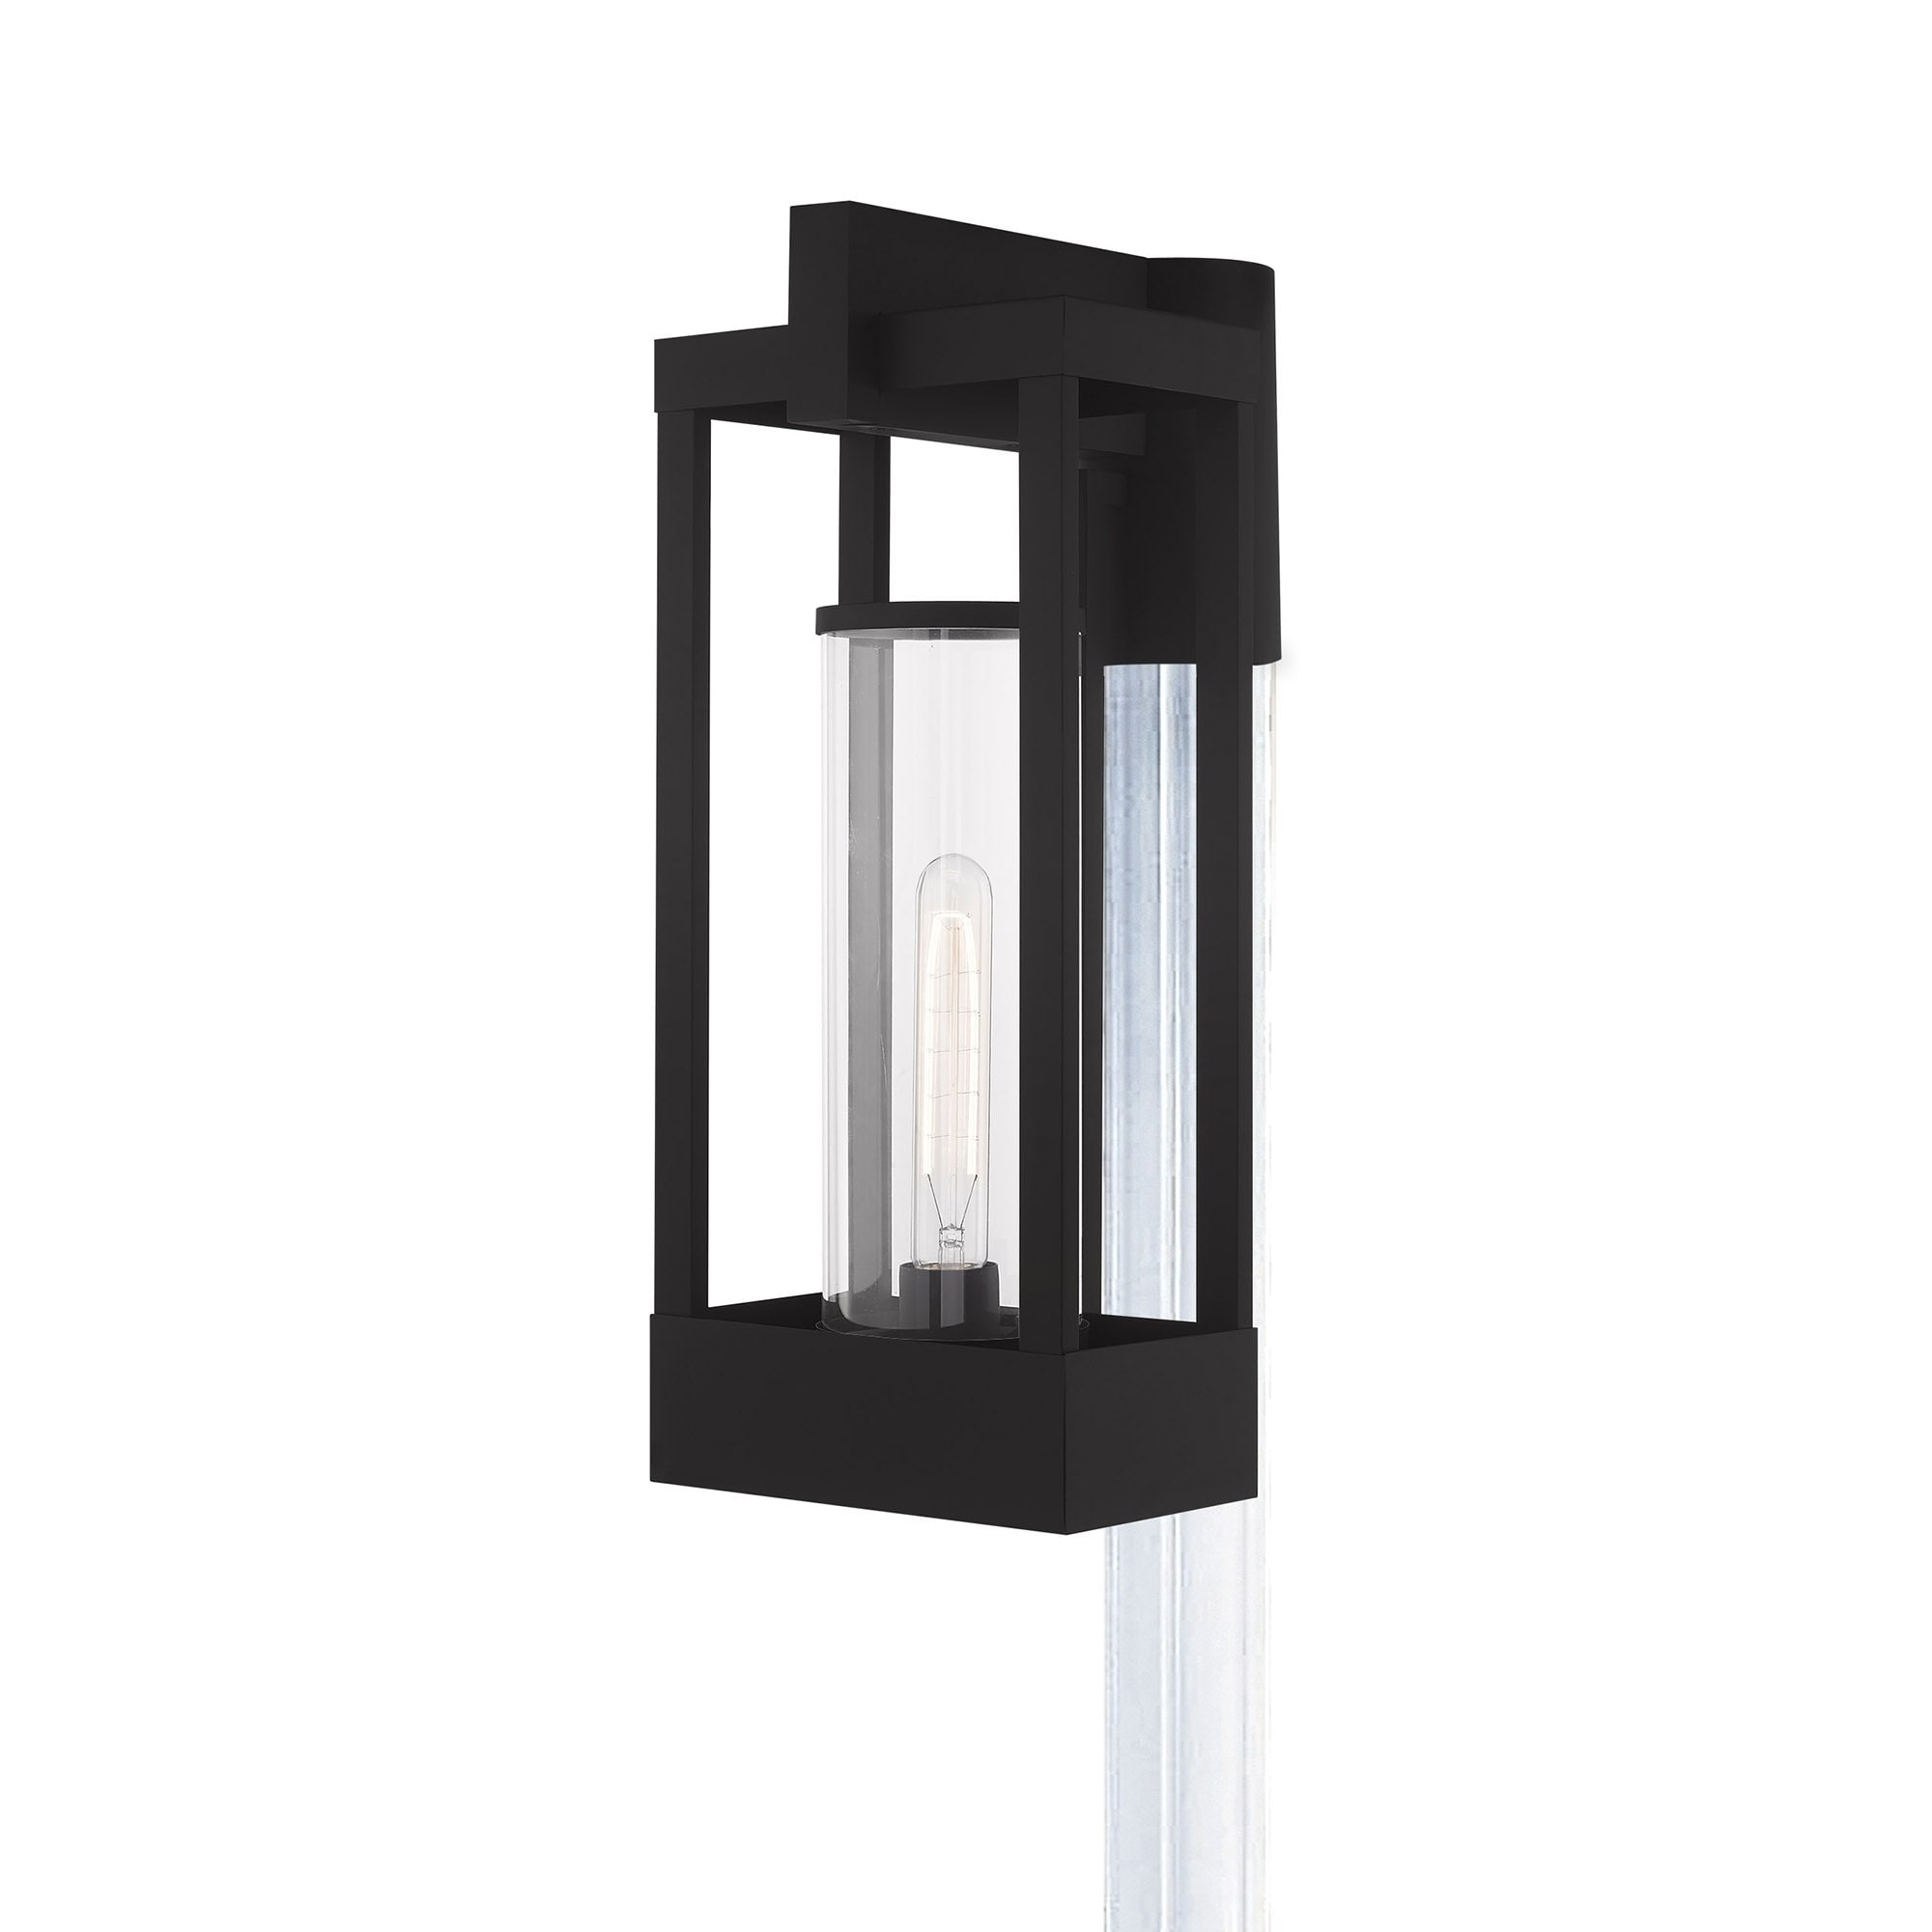 Livex Lighting - Delancey - 1 Light Outdoor Post Top Lantern in Contemporary - image 2 of 5